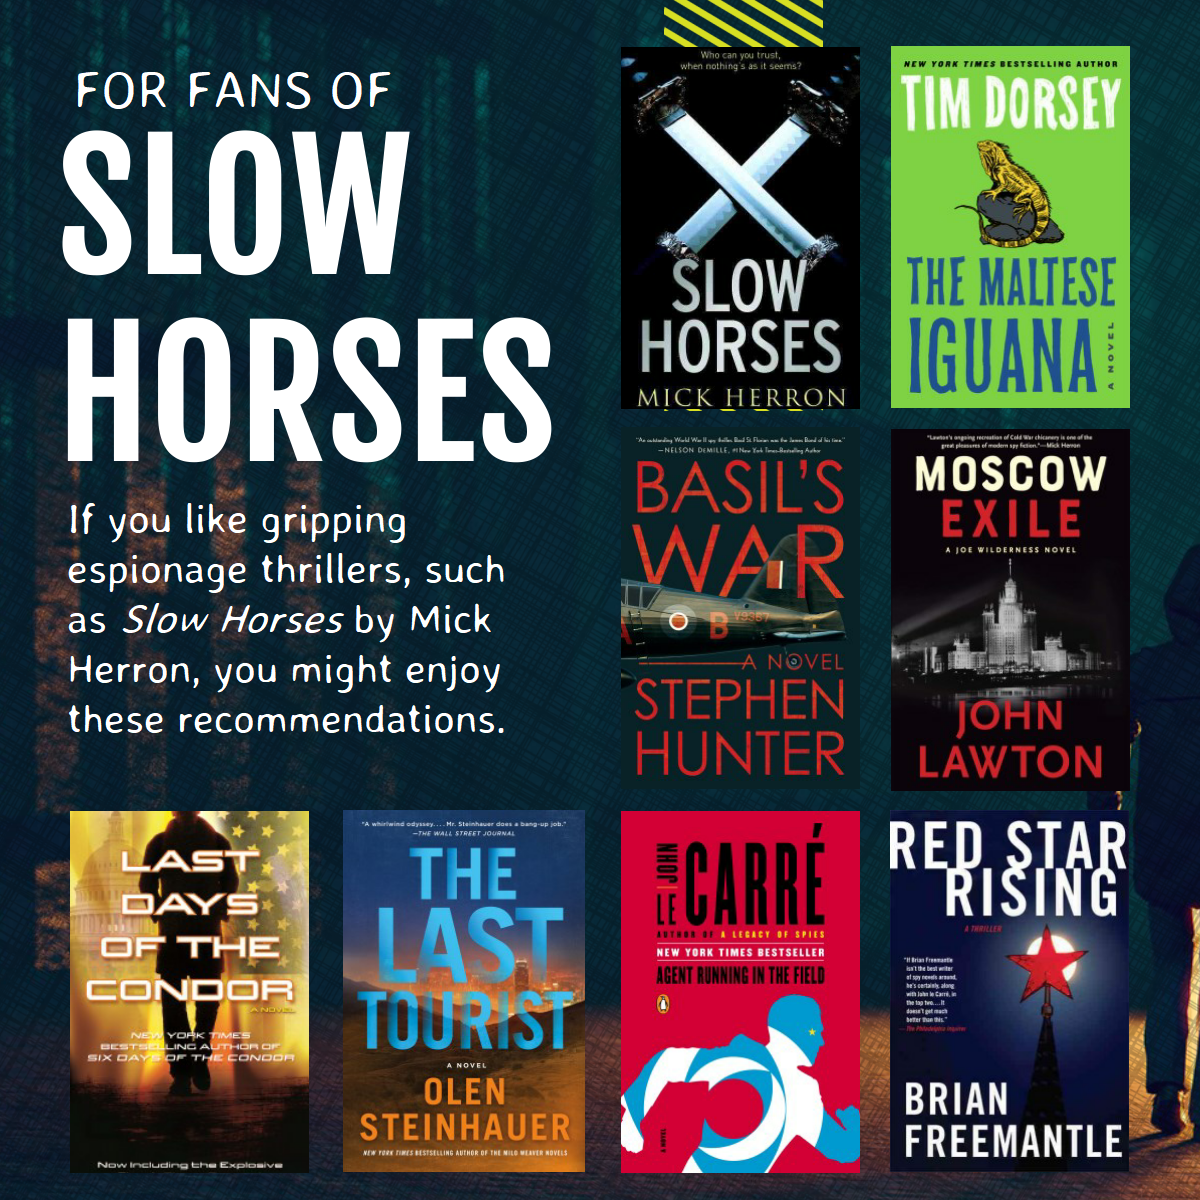 link to "for fans of slow horses" booklist